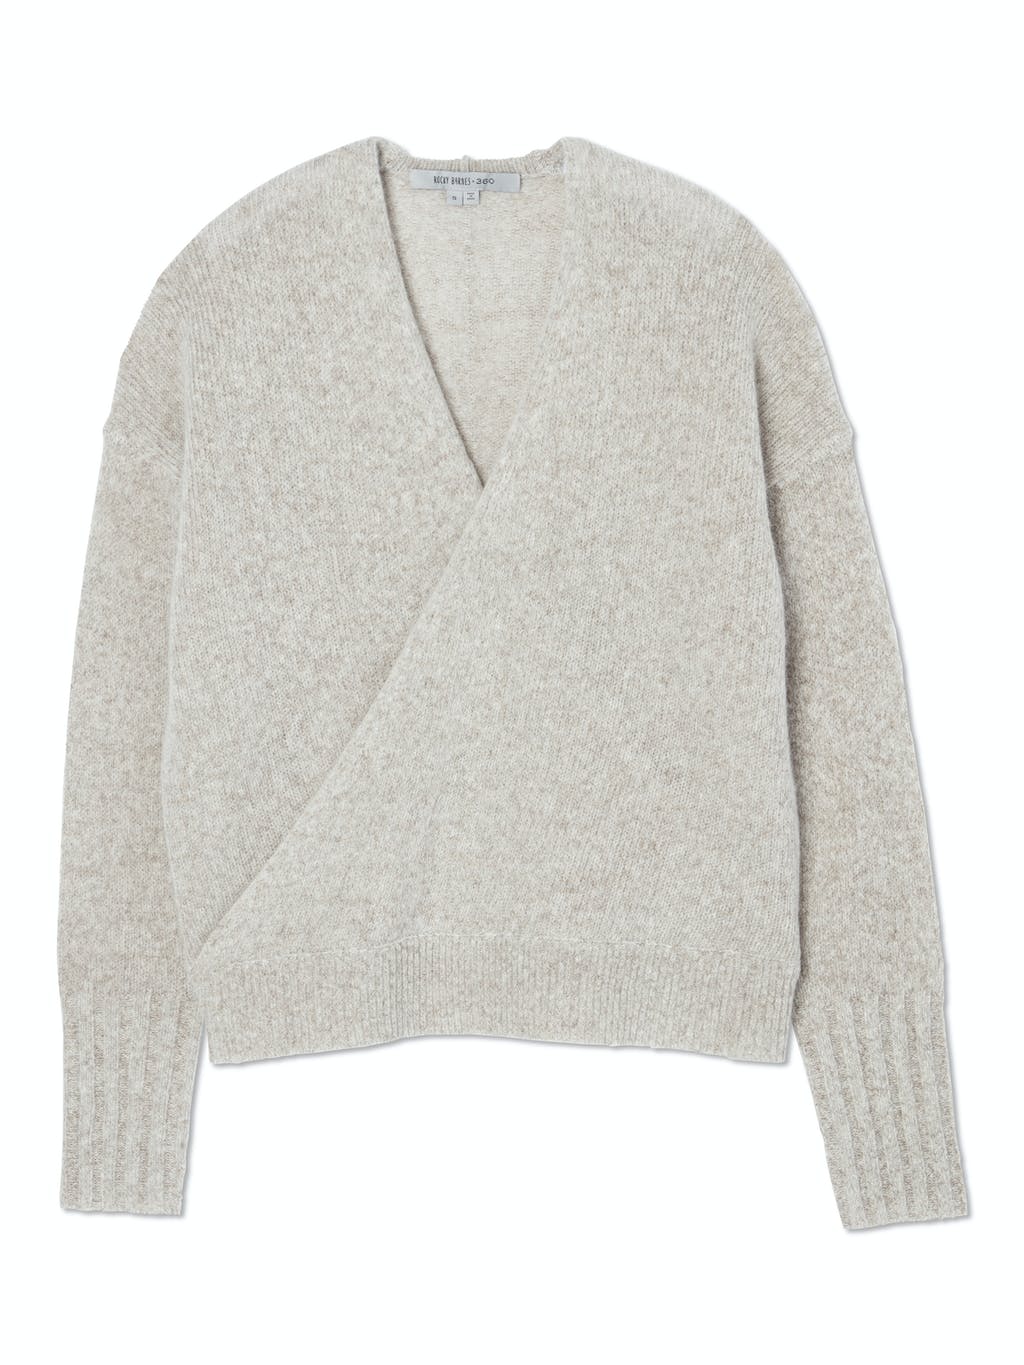 Karlie Pullover Wrap Sweater